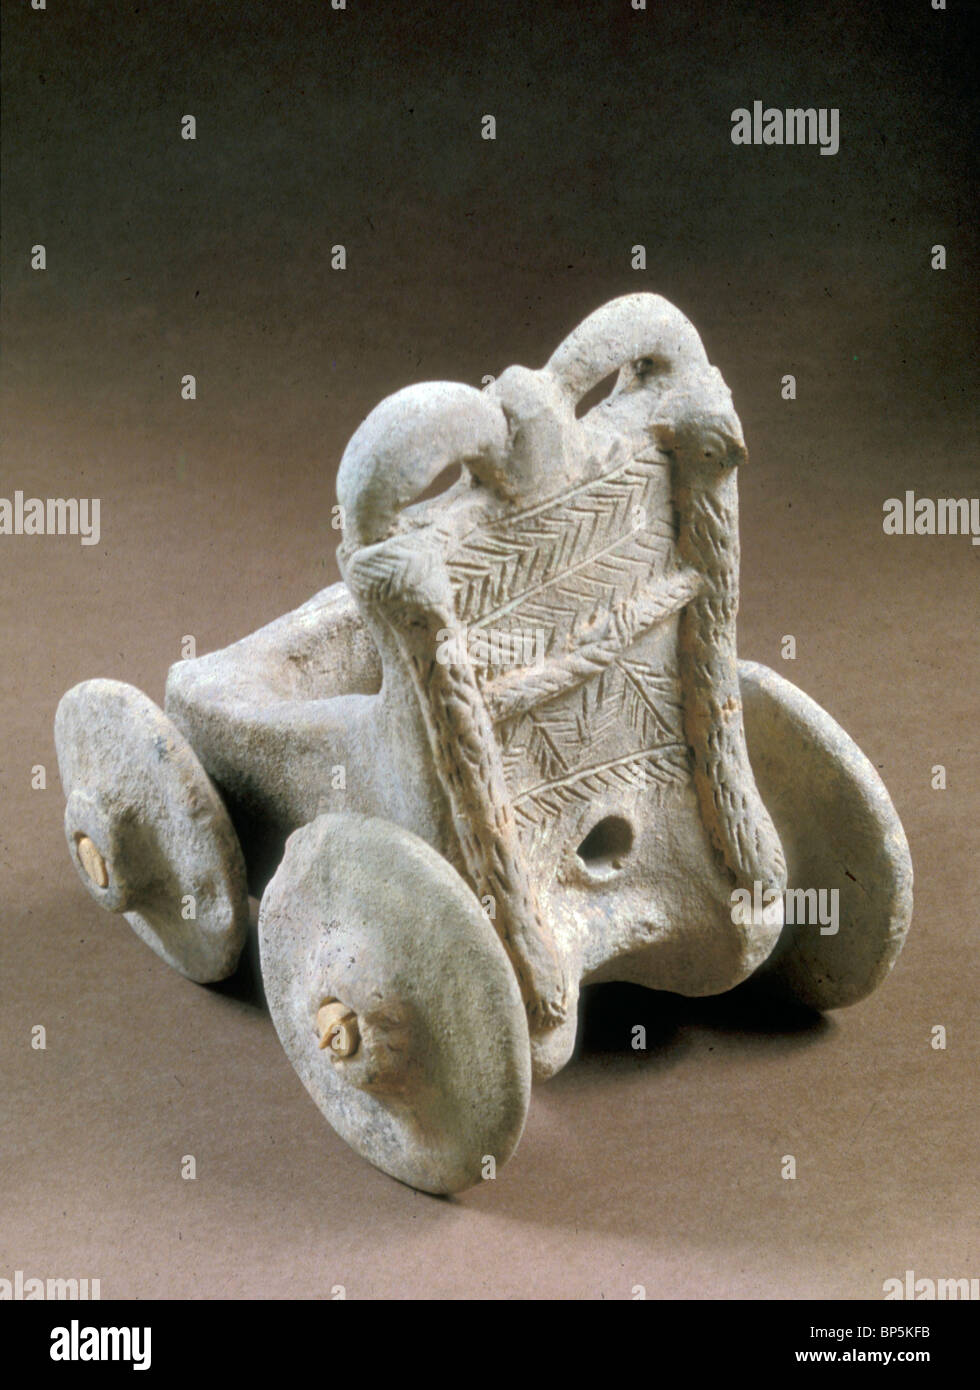 FOUR WHEELED TERRACOTTA MODEL OF A CHARIOT DEPICTS THE TYPE OF VEHICLE USED IN THE THIRD & EARLY SECOND MILLENNIUM B.C. & Jacob Stock Photo